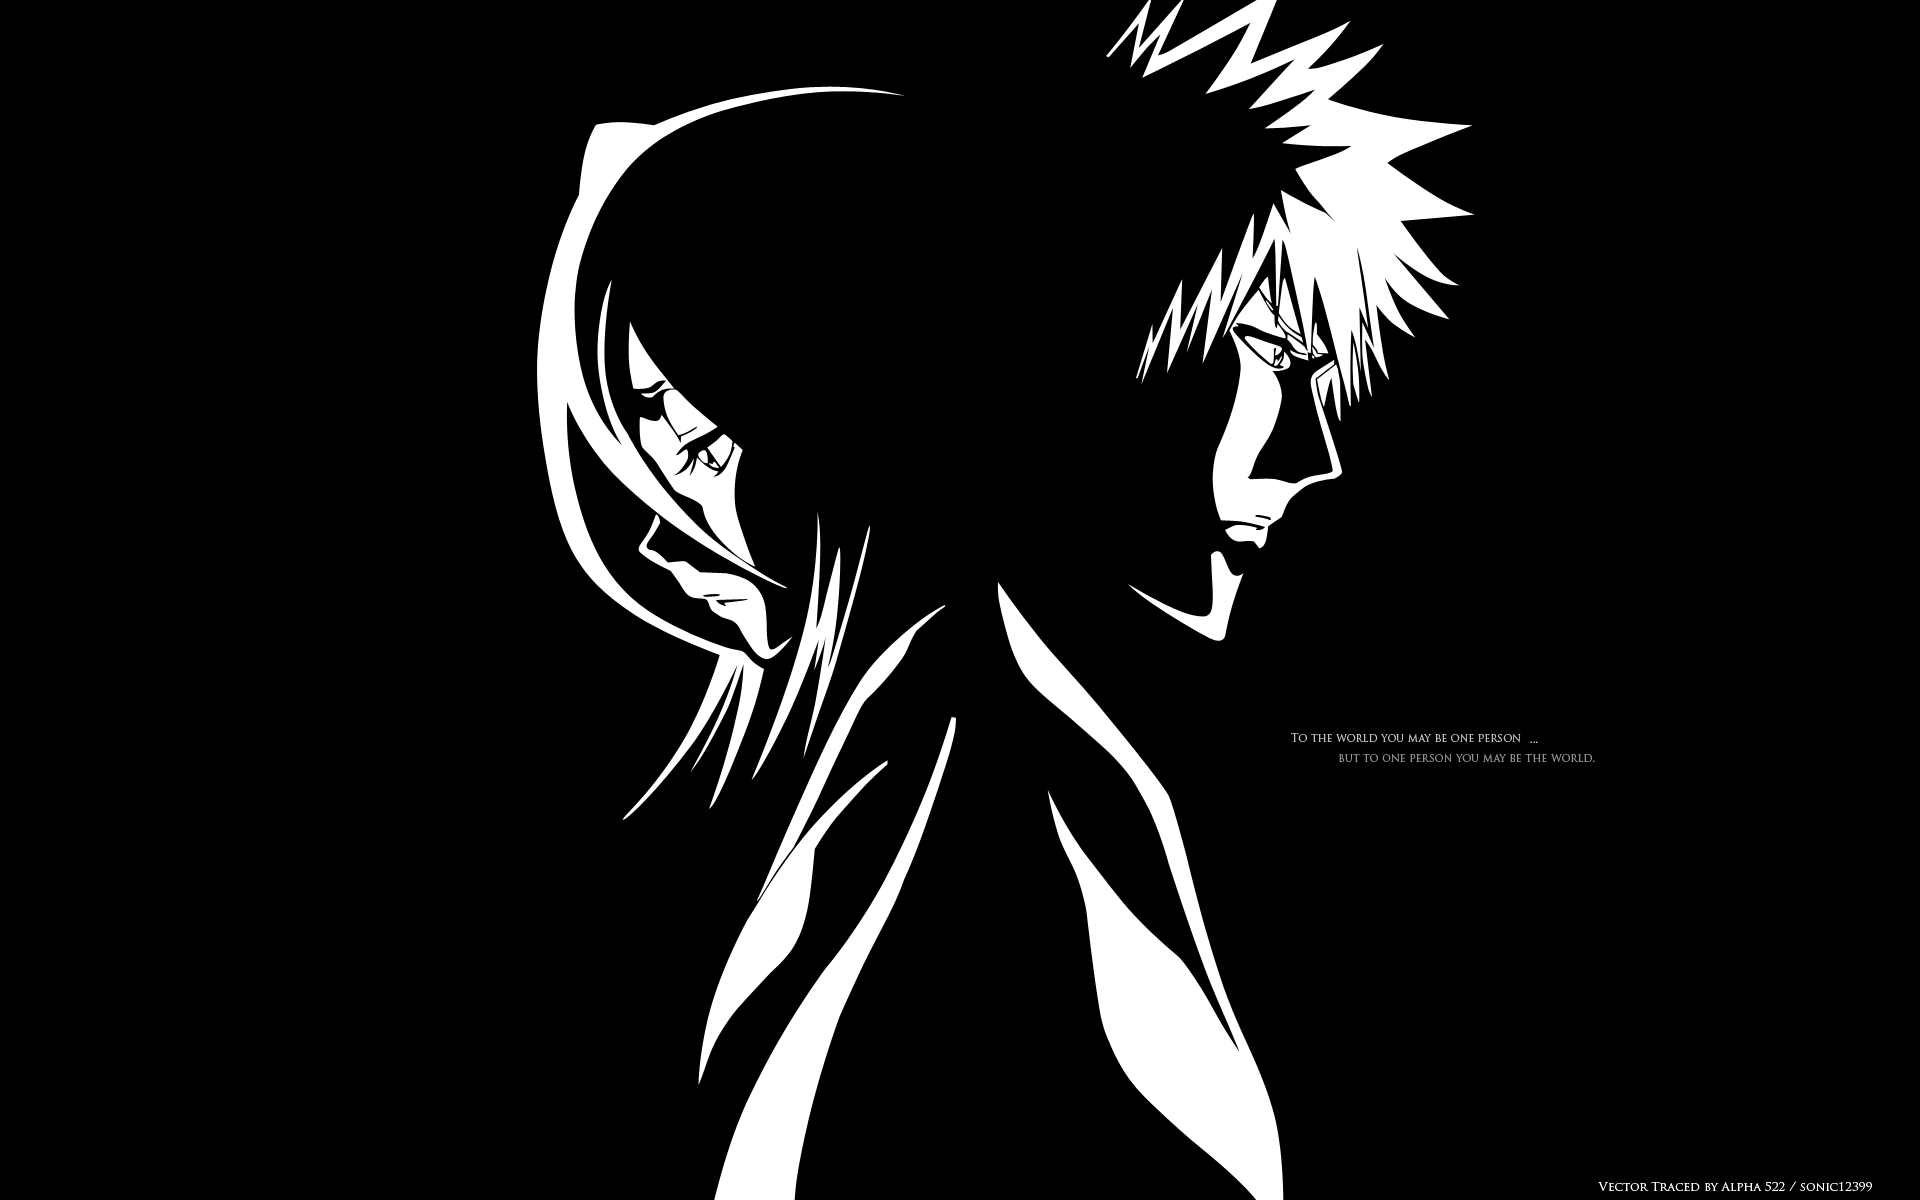 Beautiful Bleach Images in High Quality